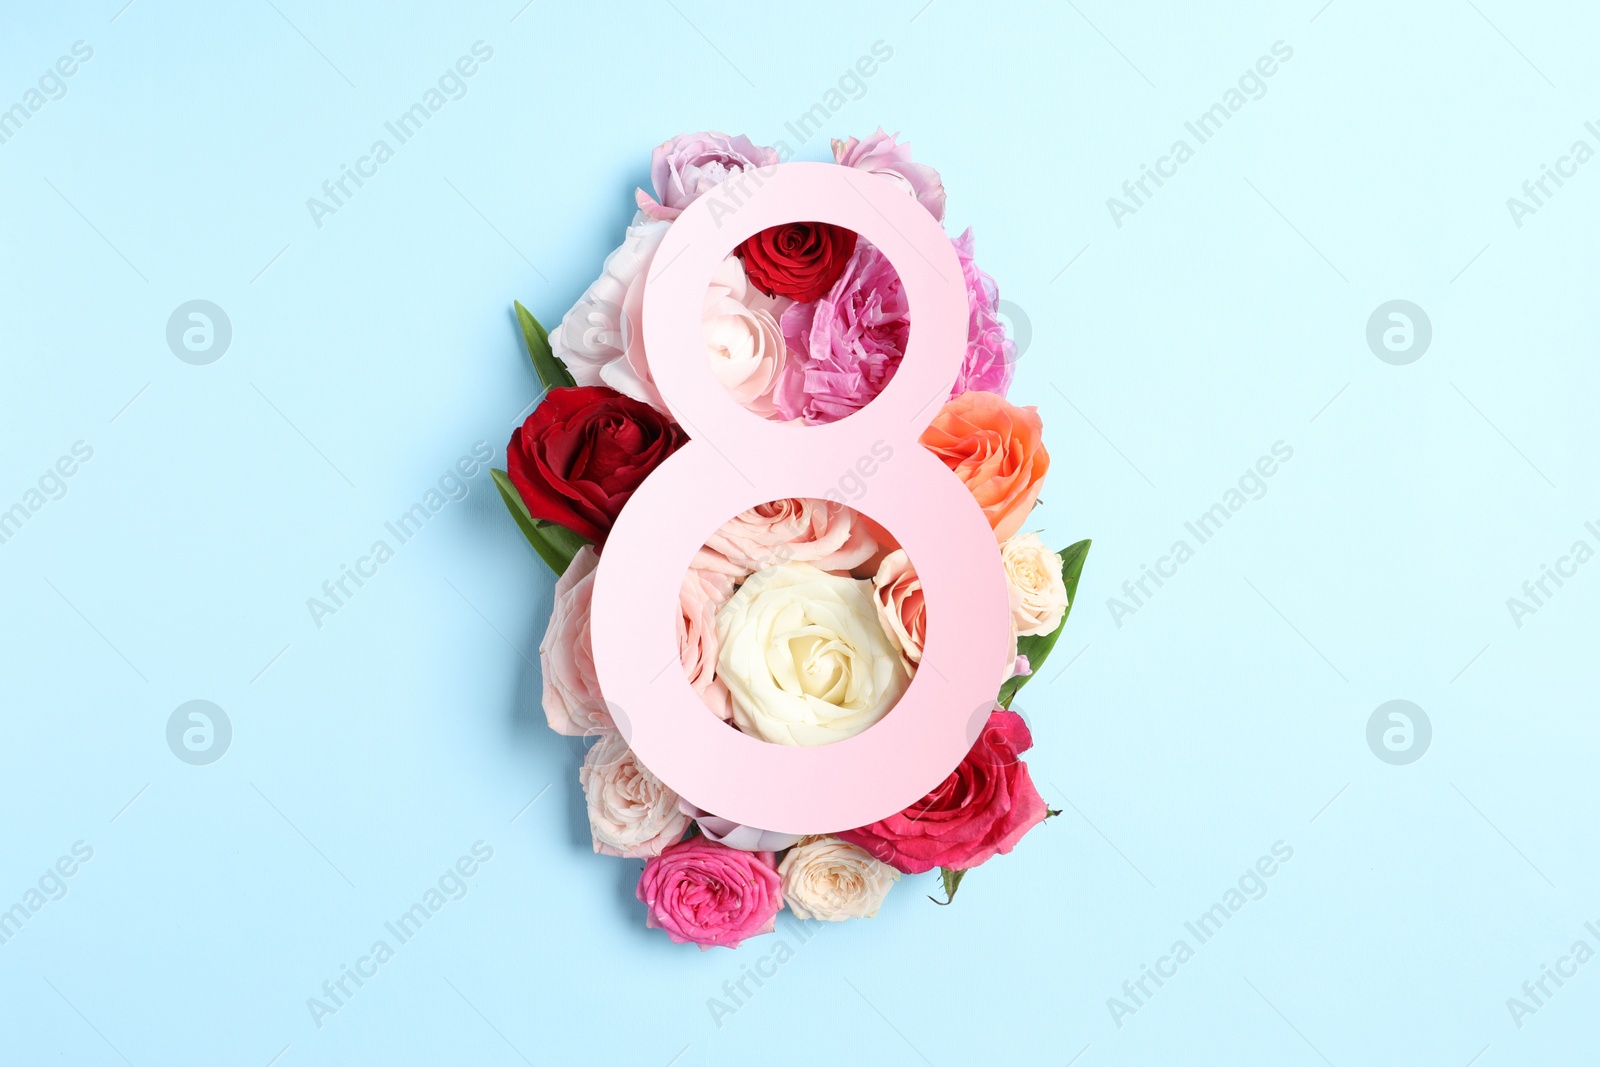 Photo of 8 March greeting card design with beautiful roses on light blue background, top view